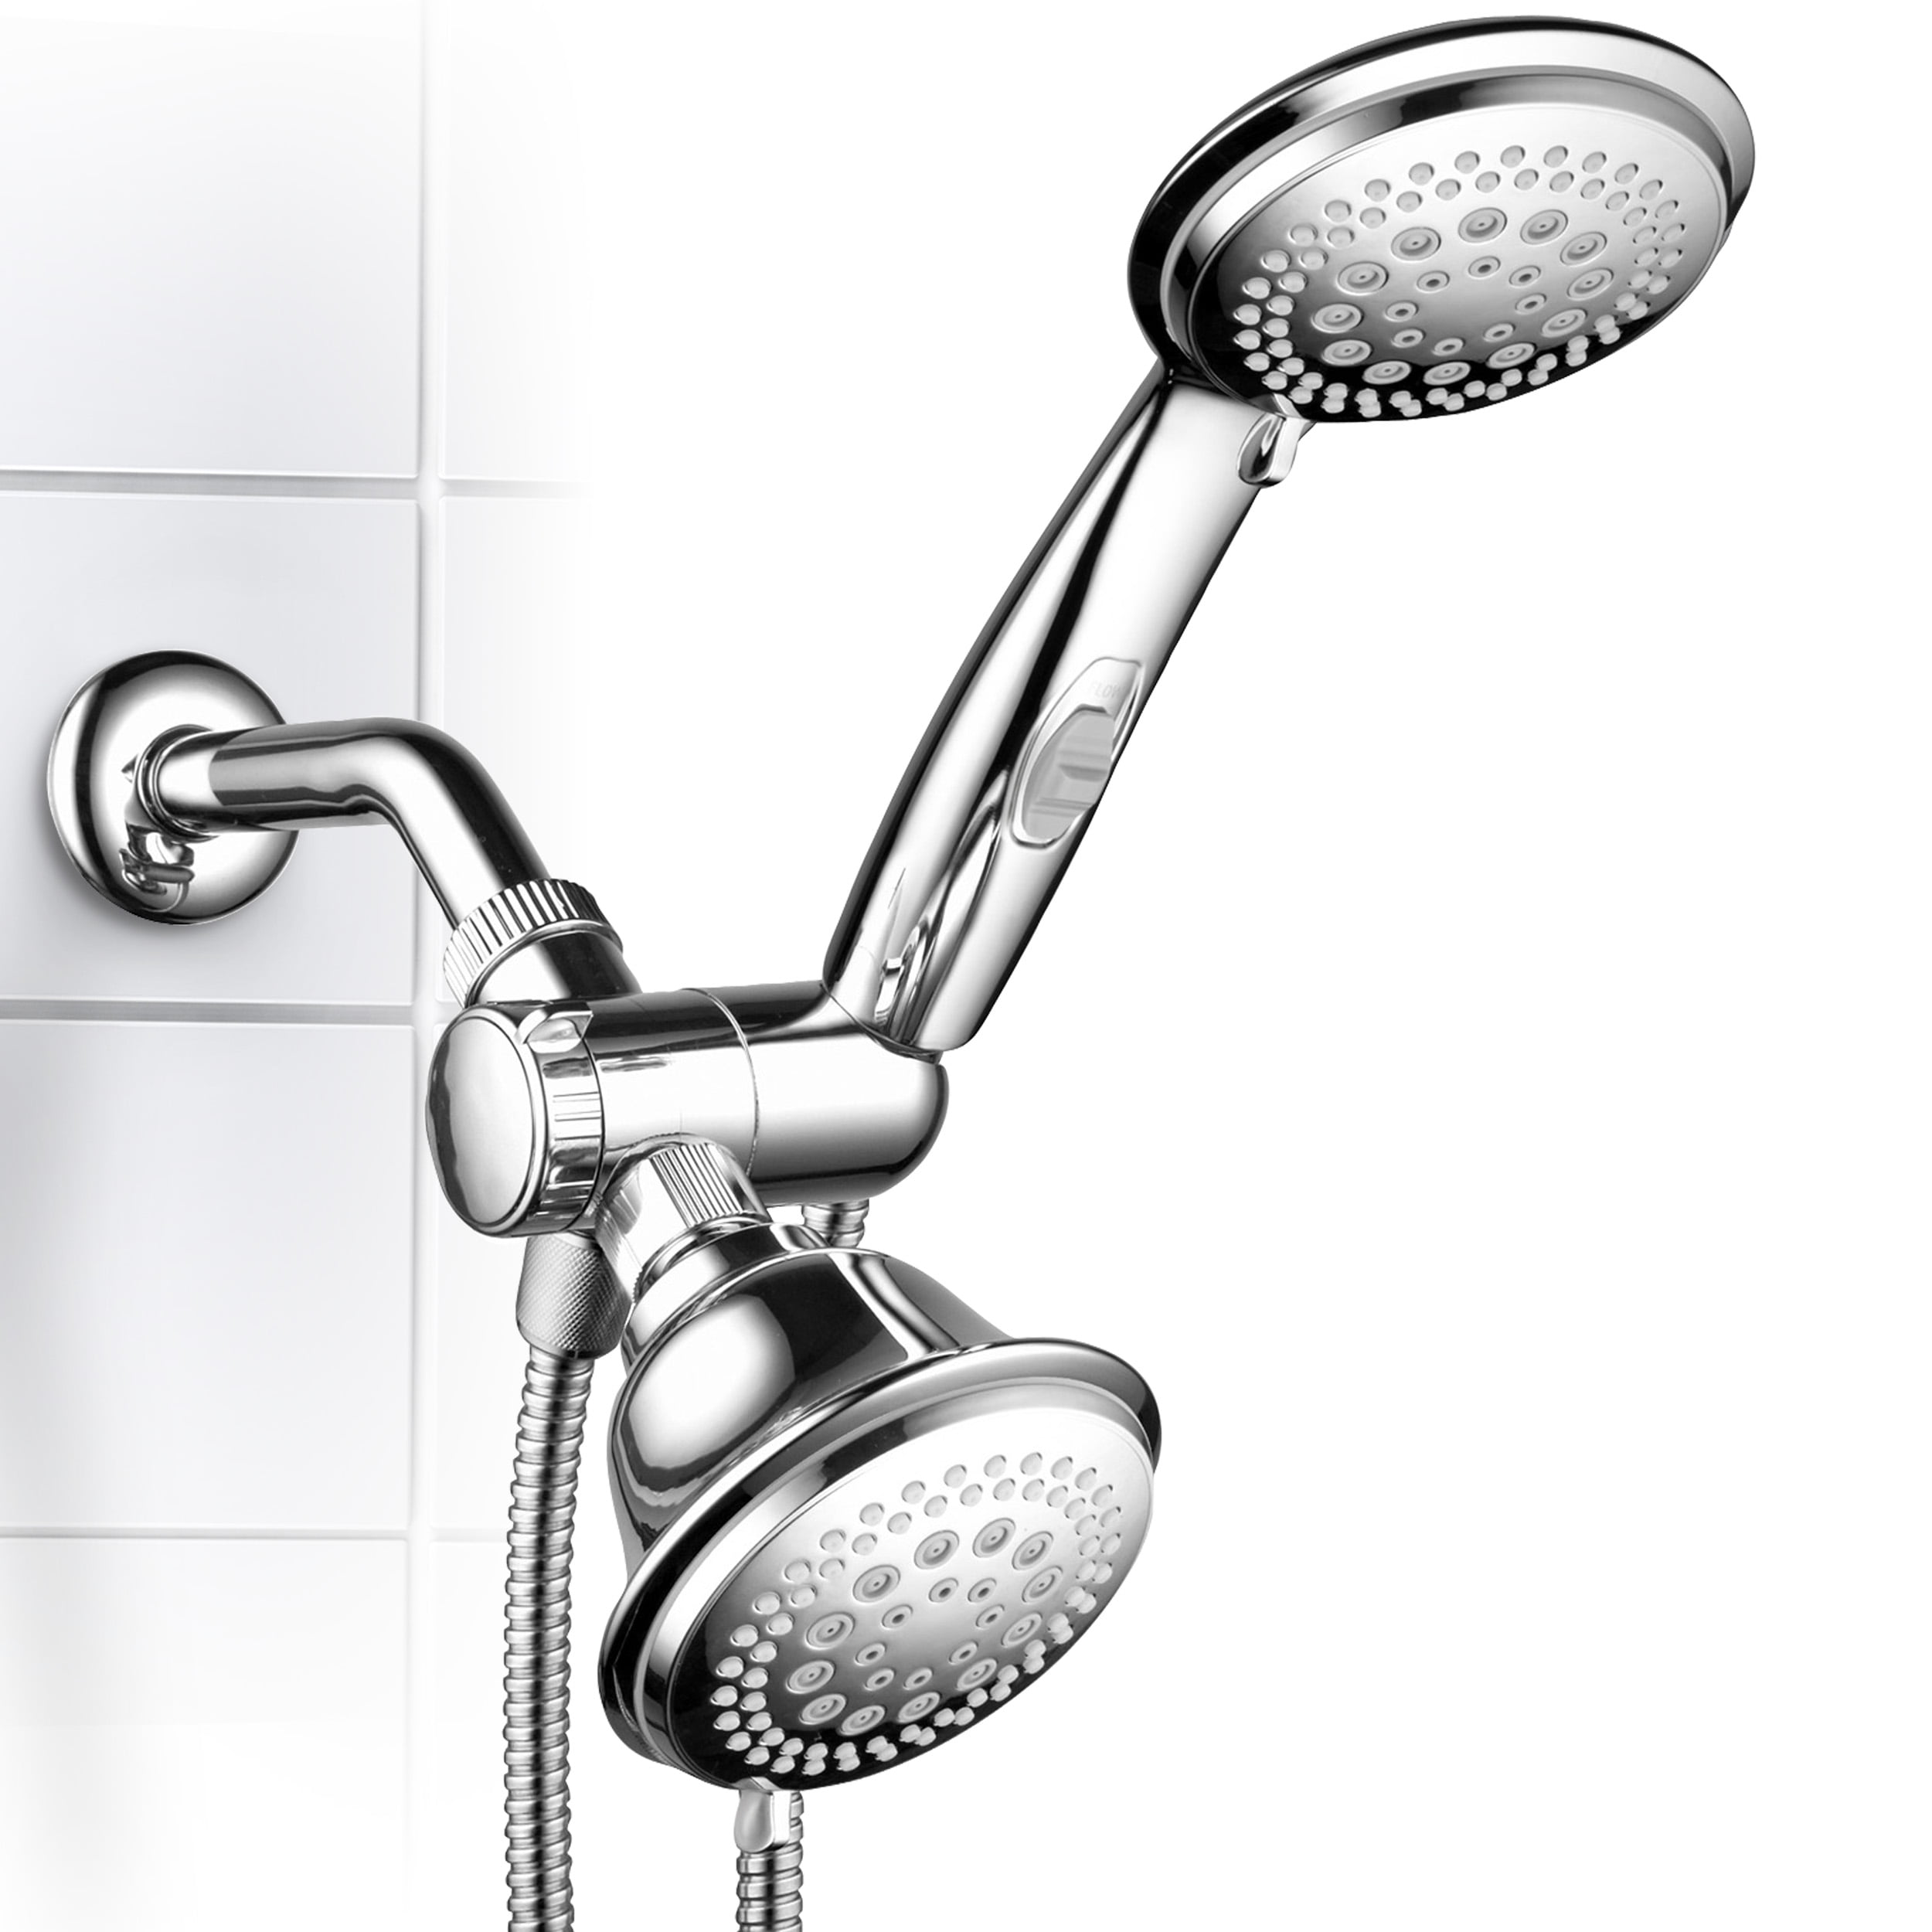 Chrome Hotel Spa High-Pressure 7-Setting Handheld Shower Head with 4-inch Face 